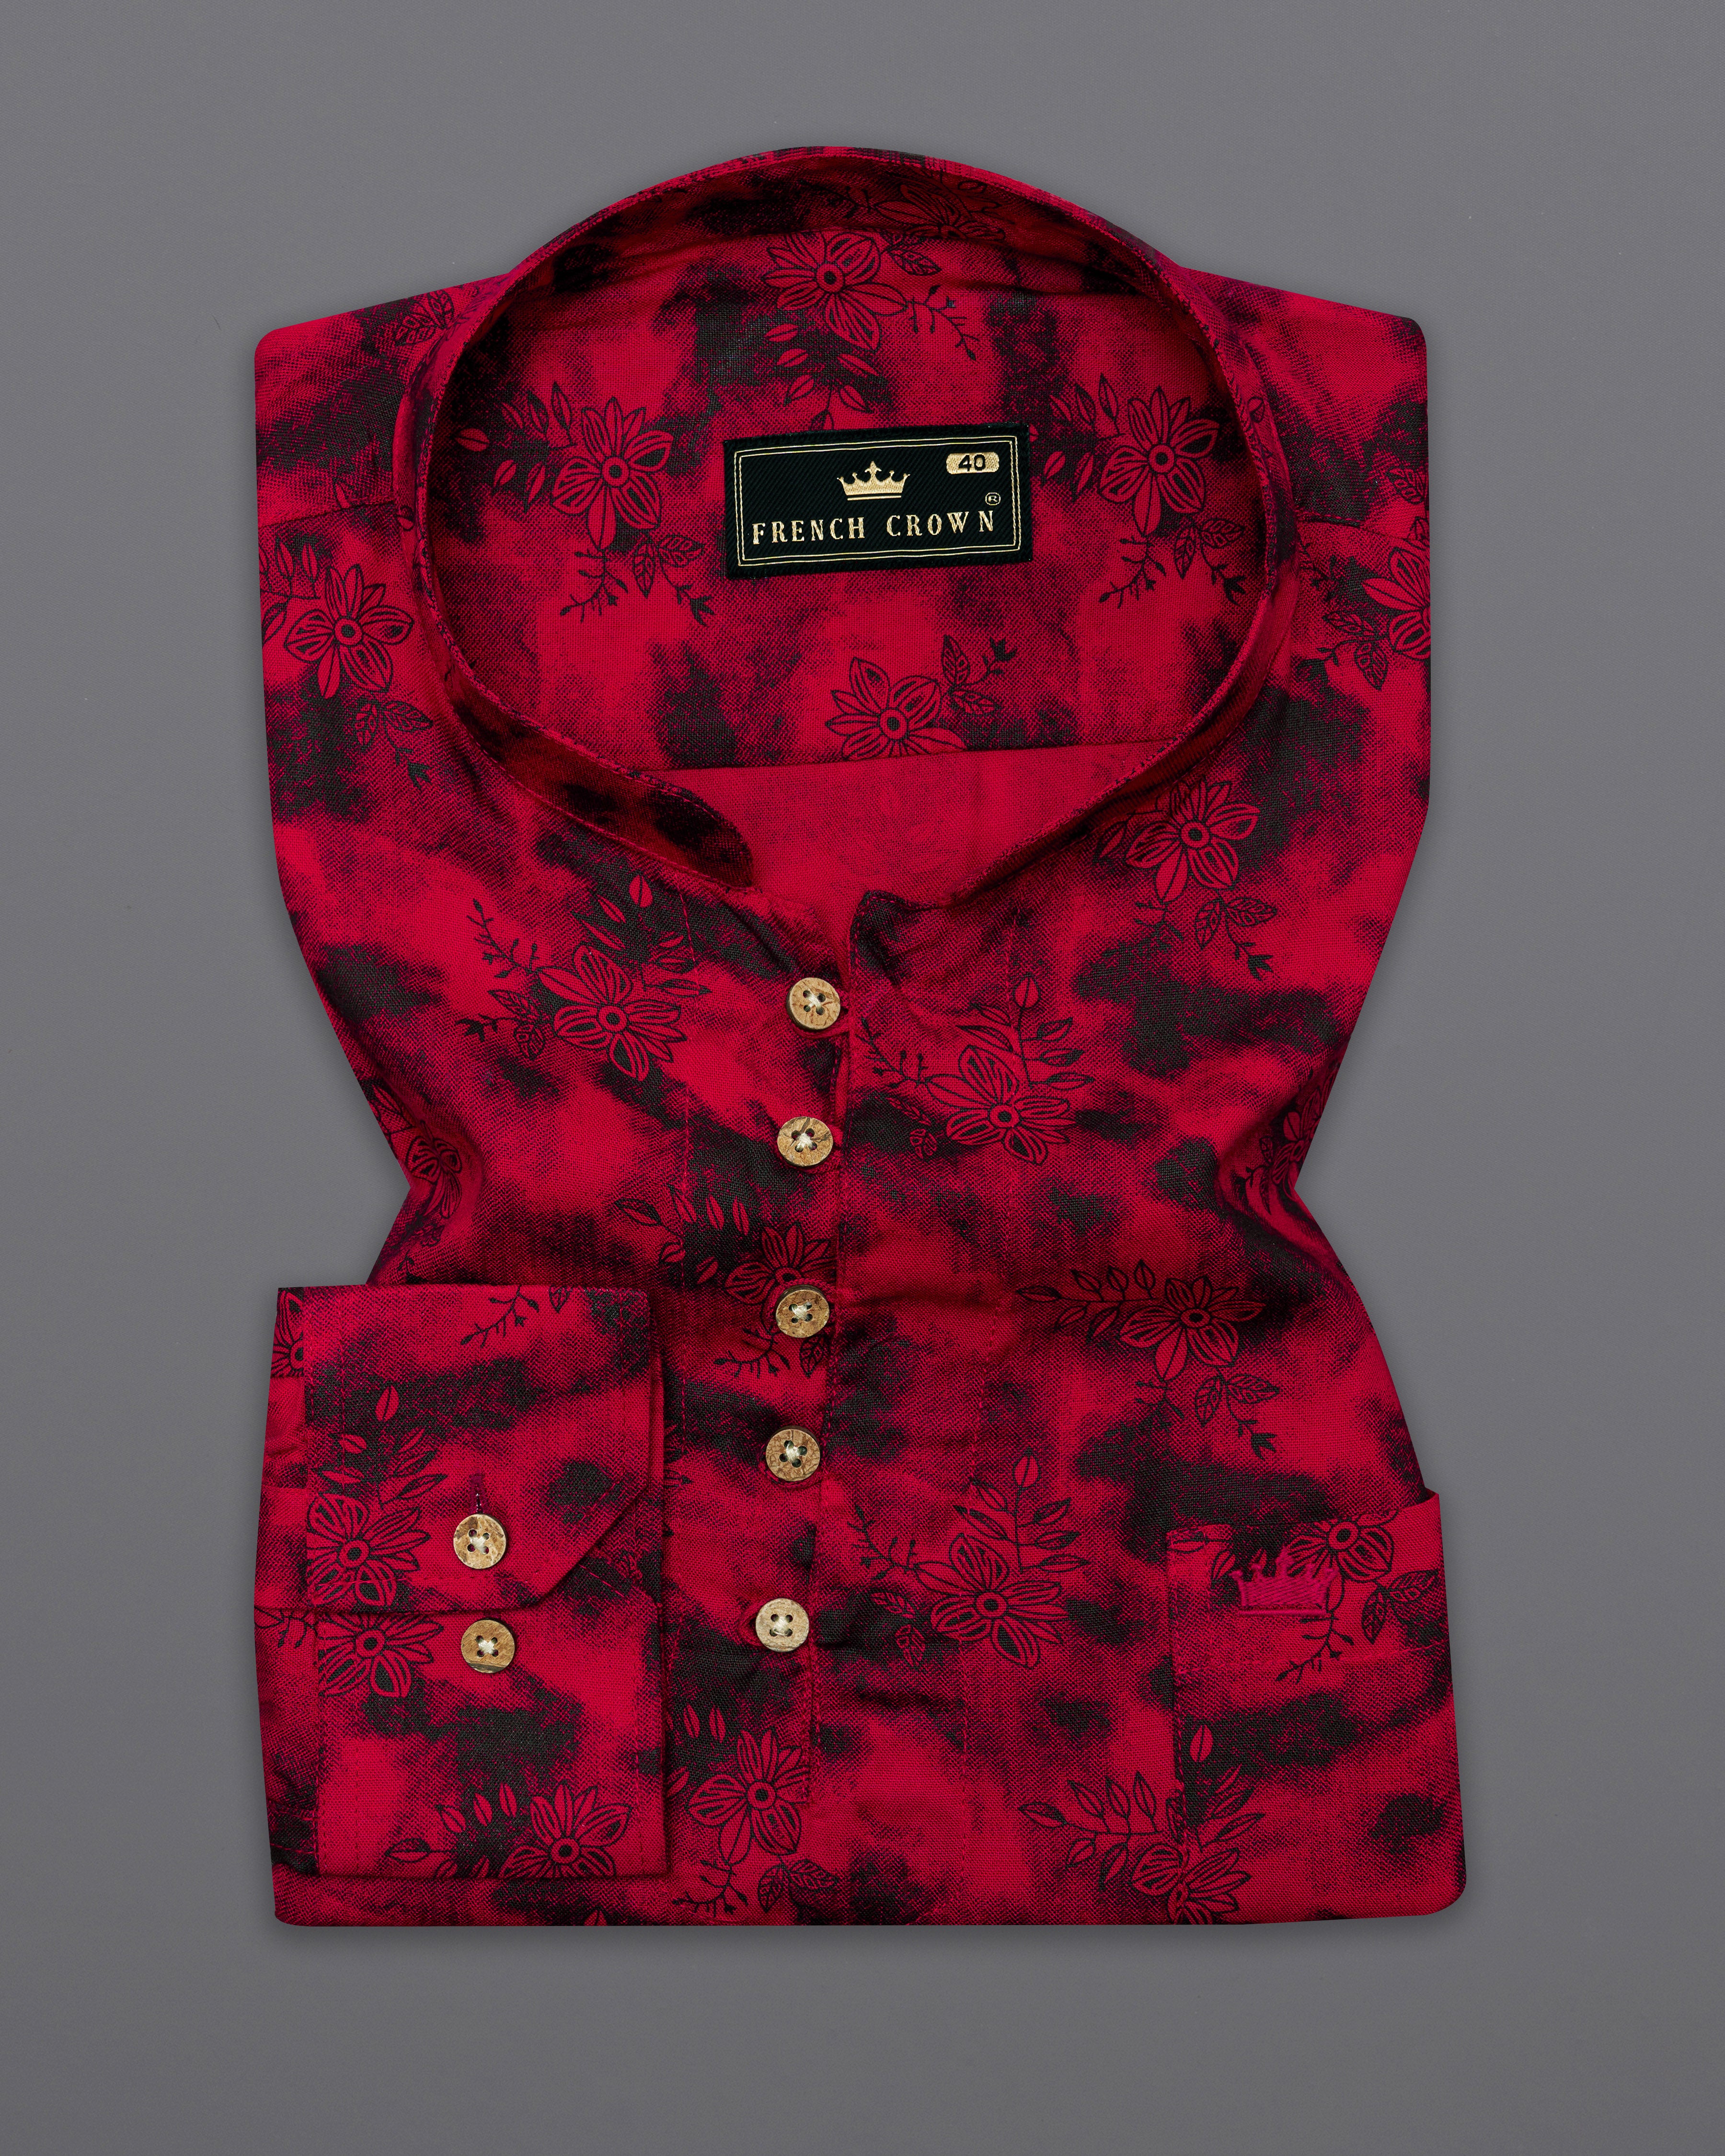 Shiraz Red and Black Floral Textured Premium Tencel Kurta Shirt 9997-KS-38, 9997-KS-H-38, 9997-KS-39, 9997-KS-H-39, 9997-KS-40, 9997-KS-H-40, 9997-KS-42, 9997-KS-H-42, 9997-KS-44, 9997-KS-H-44, 9997-KS-46, 9997-KS-H-46, 9997-KS-48, 9997-KS-H-48, 9997-KS-50, 9997-KS-H-50, 9997-KS-52, 9997-KS-H-52